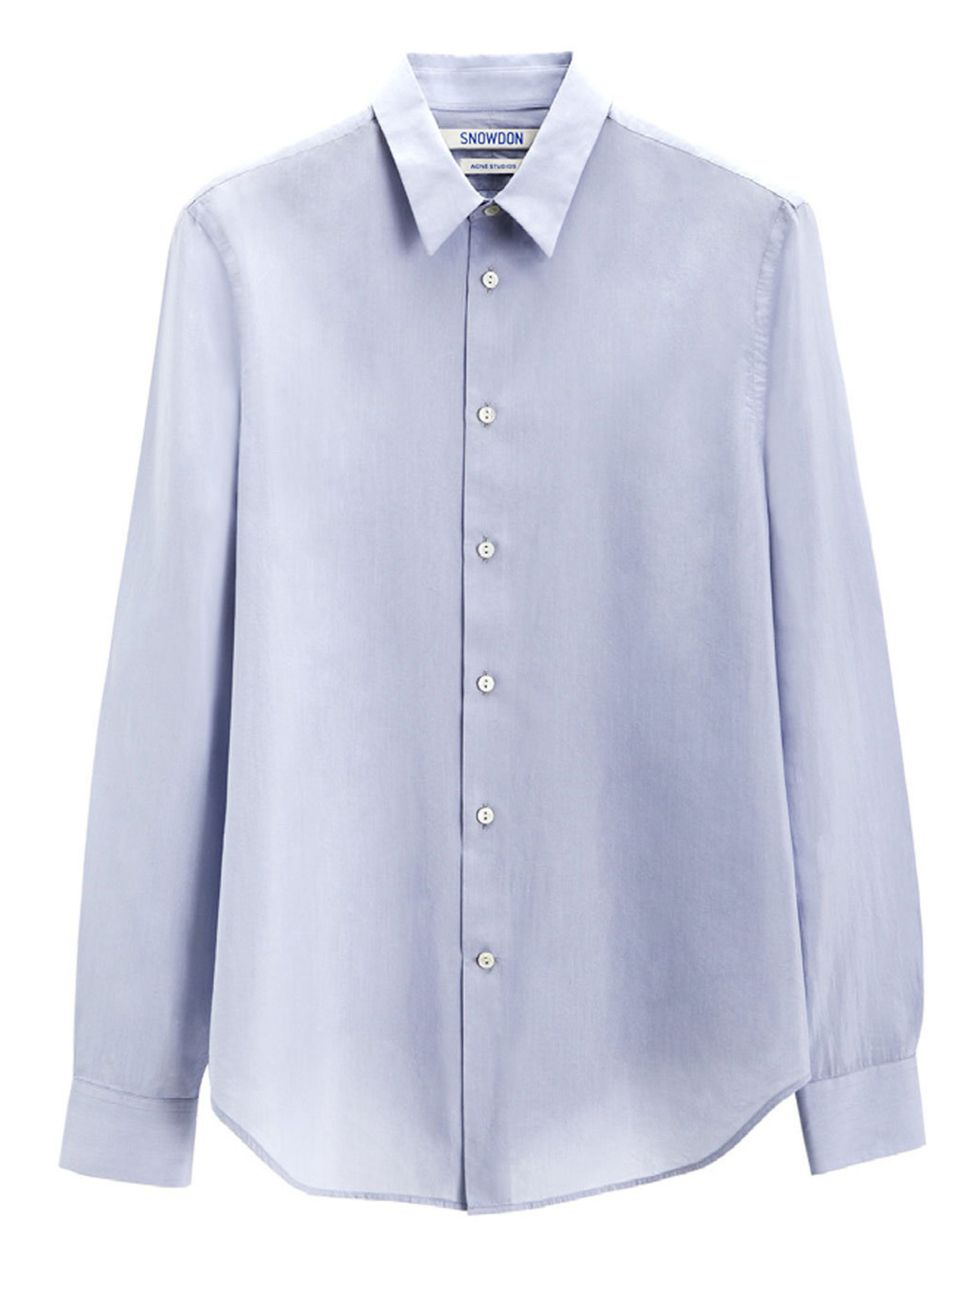 <p>A shirt from Acne's Snowdon Blue project</p>